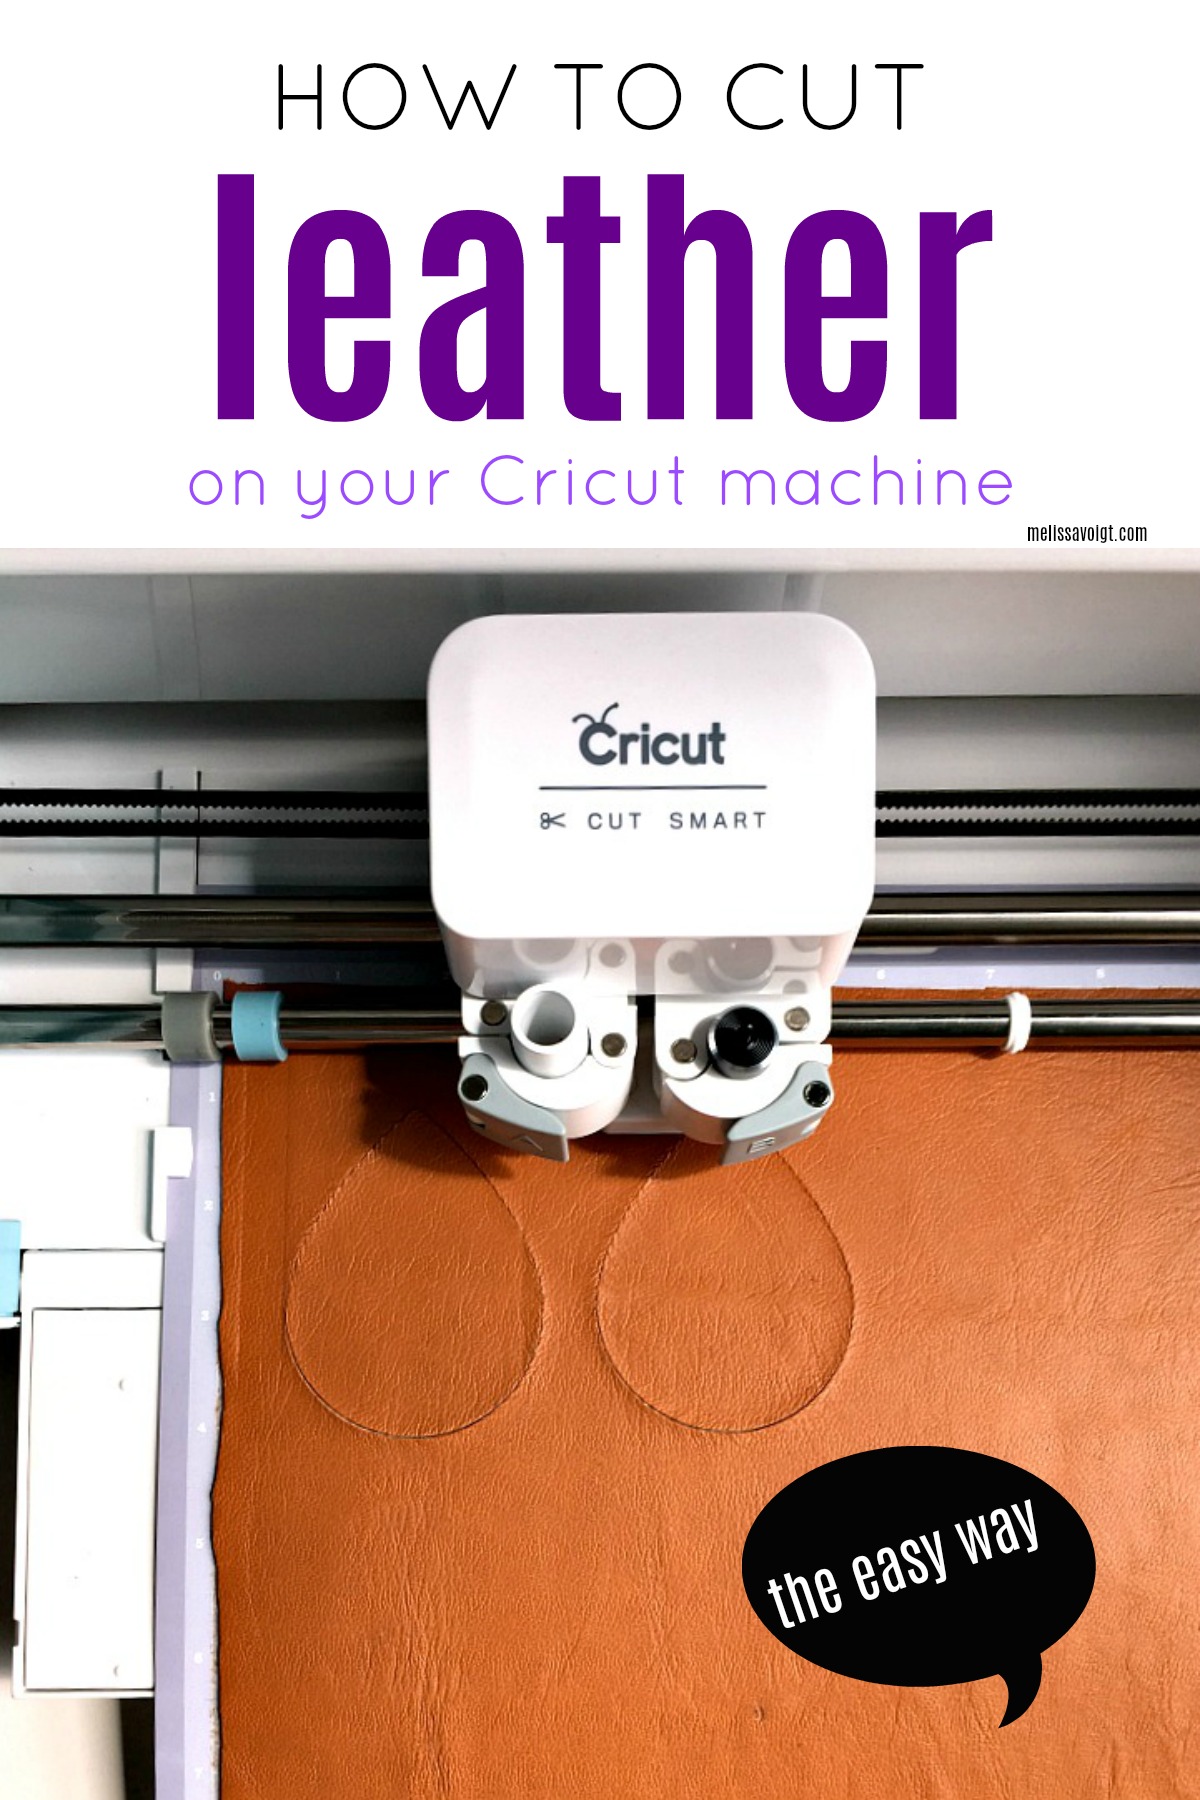 HOW TO CUT FAUX LEATHER ON A CRICUT — melissa voigt